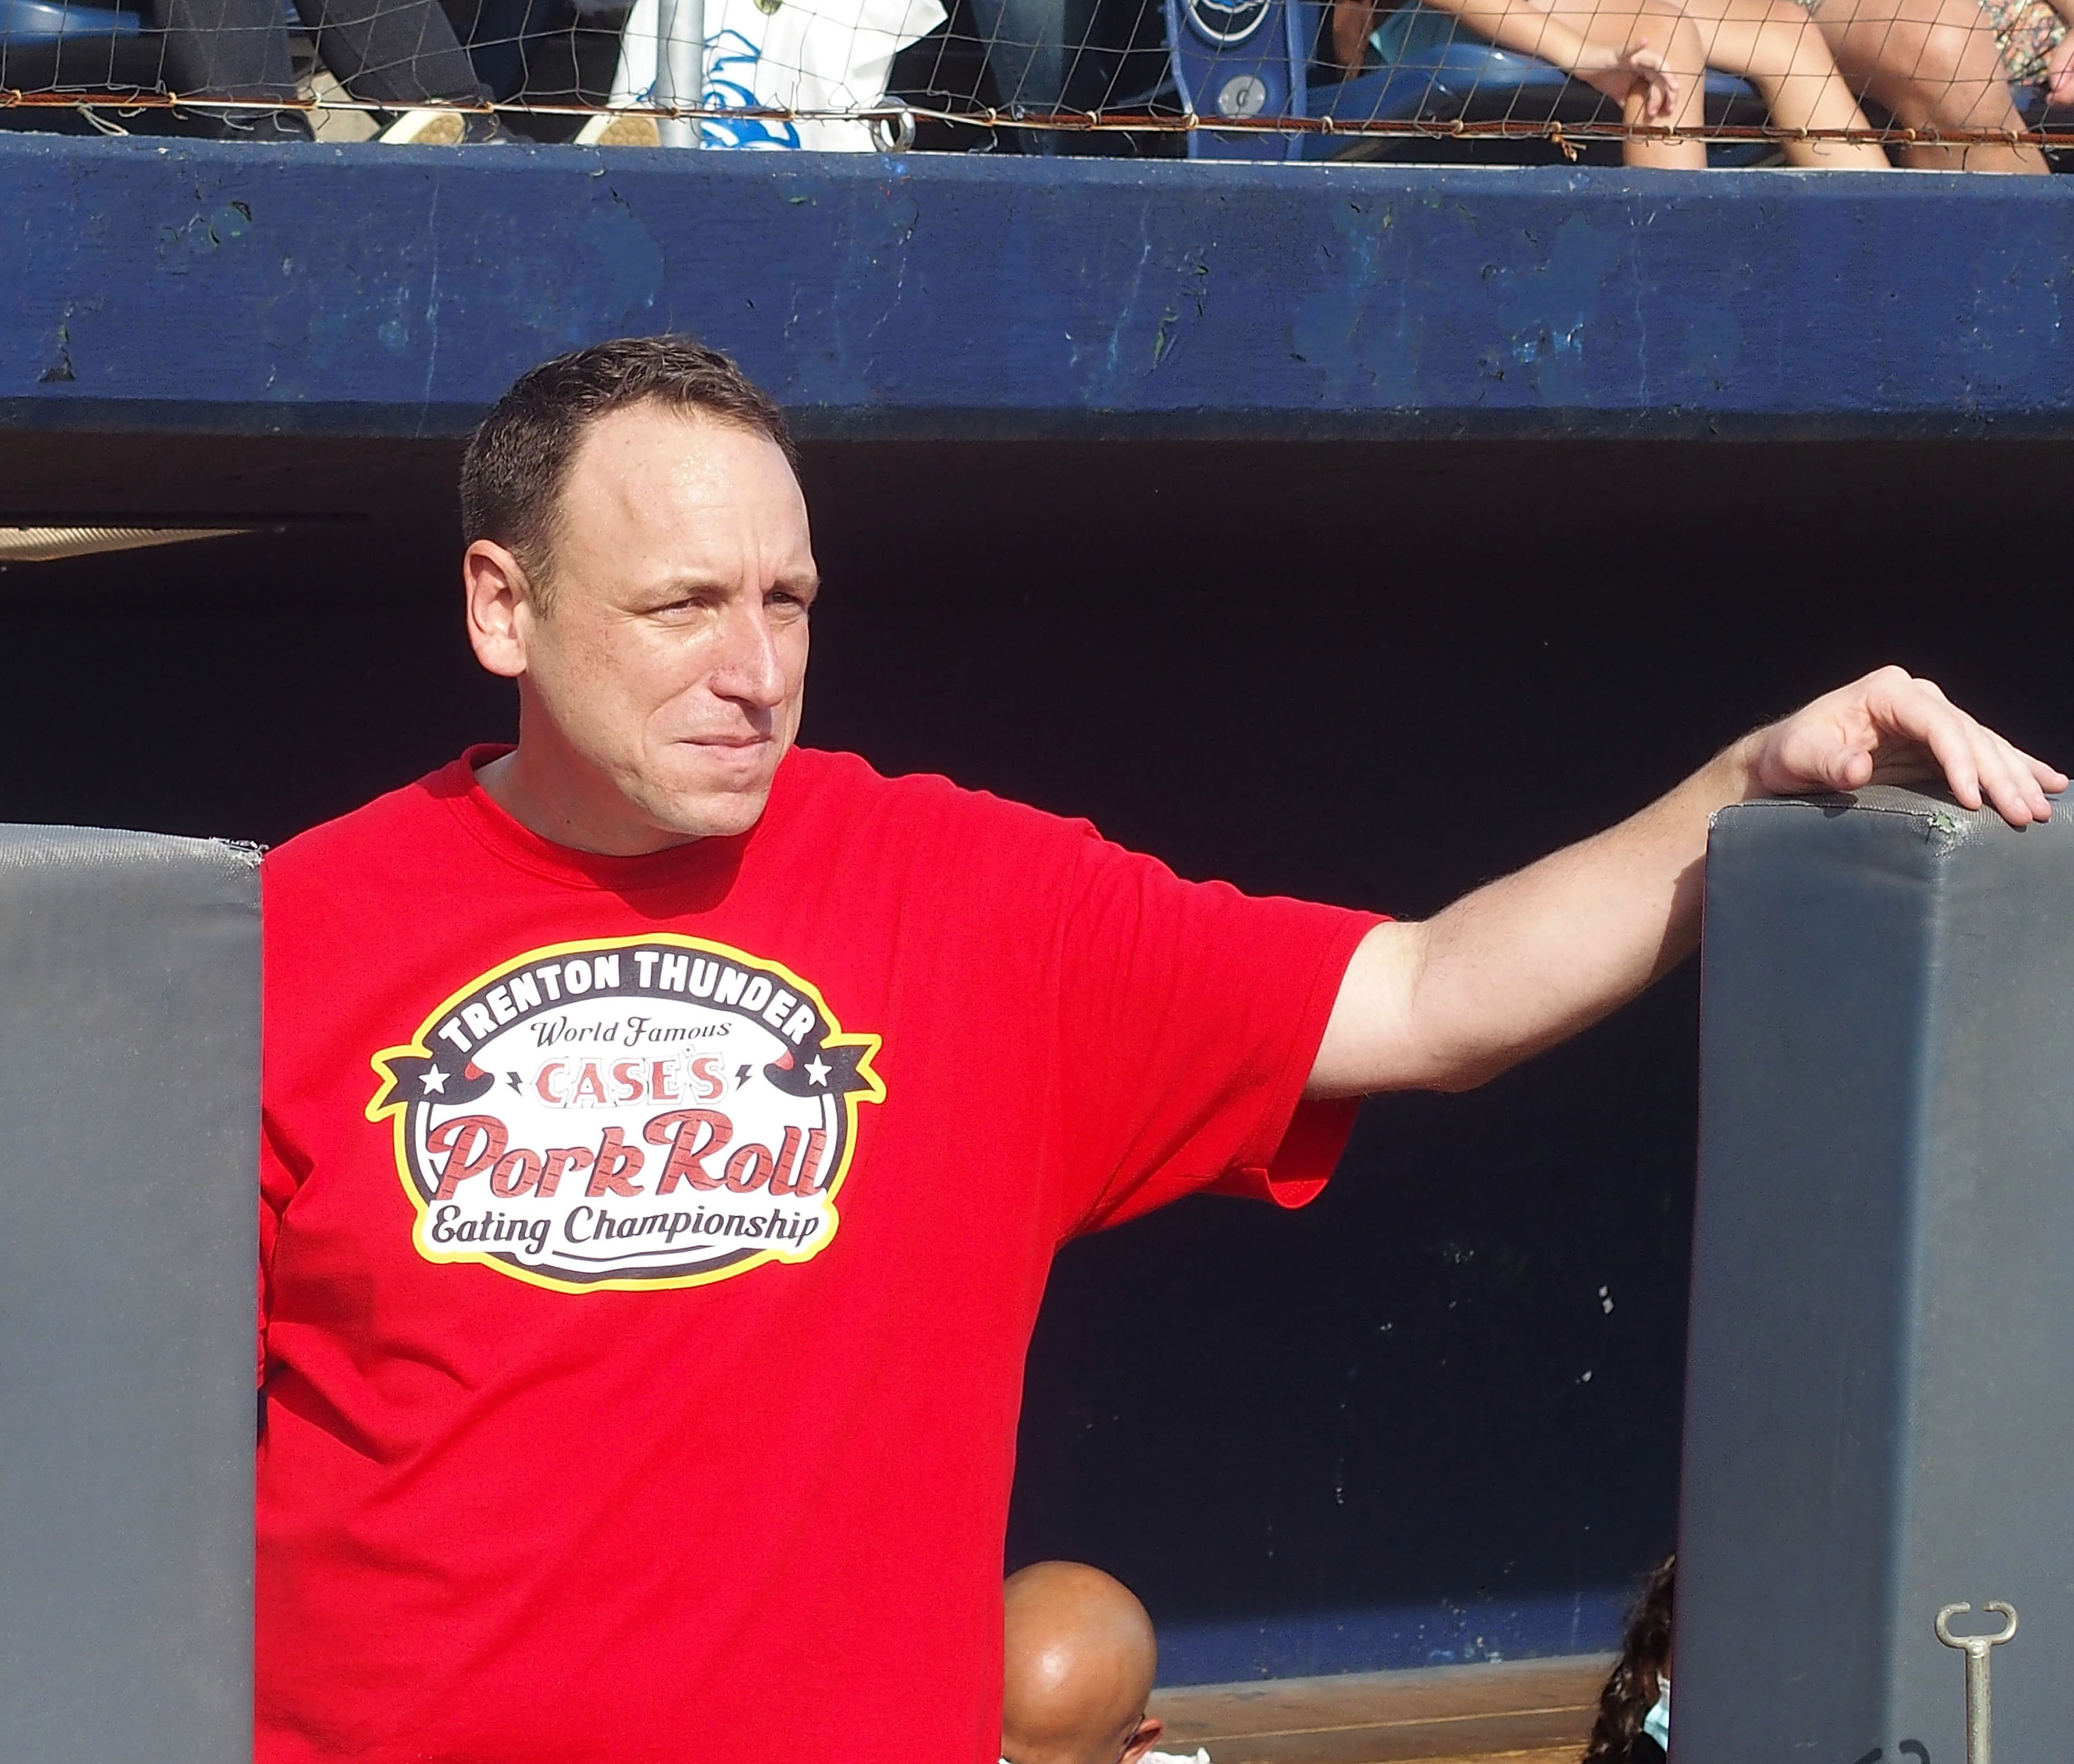 Joey Chestnut participates in the Trenton Thunder Case's World Famous Pork Roll Eating Championship Contest on September 25, 2021, in Trenton, New Jersey.